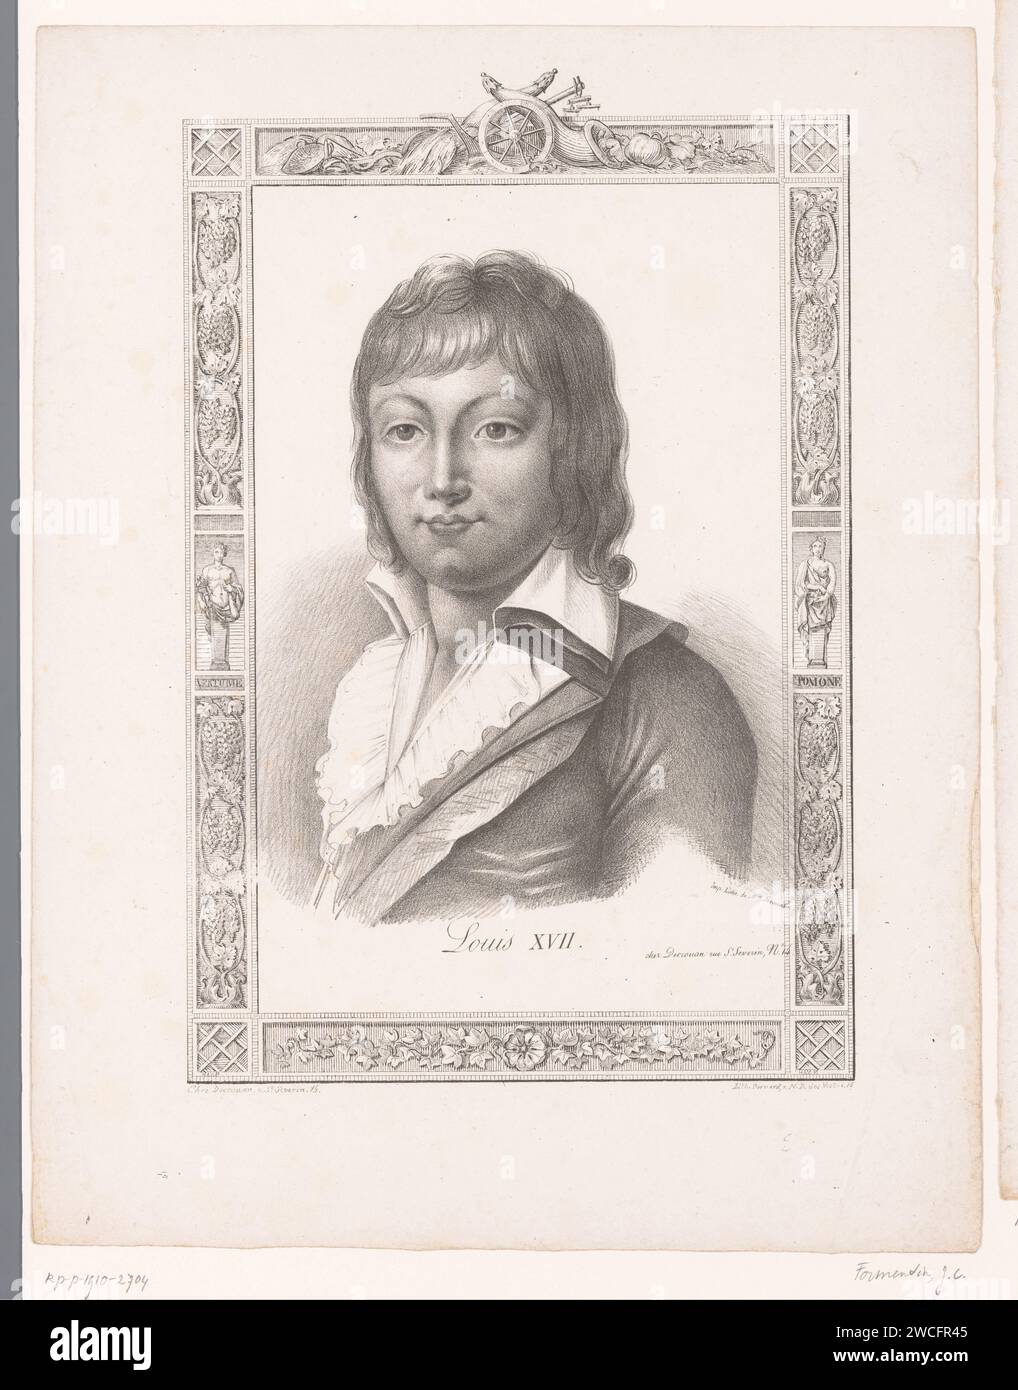 Ritratto di Lodewijk XVII van France, Anonimo, Mademoiselle Formentin (Joséphine Clémence), 1826 - 1829 stampa Paris paper Historical Persons Foto Stock